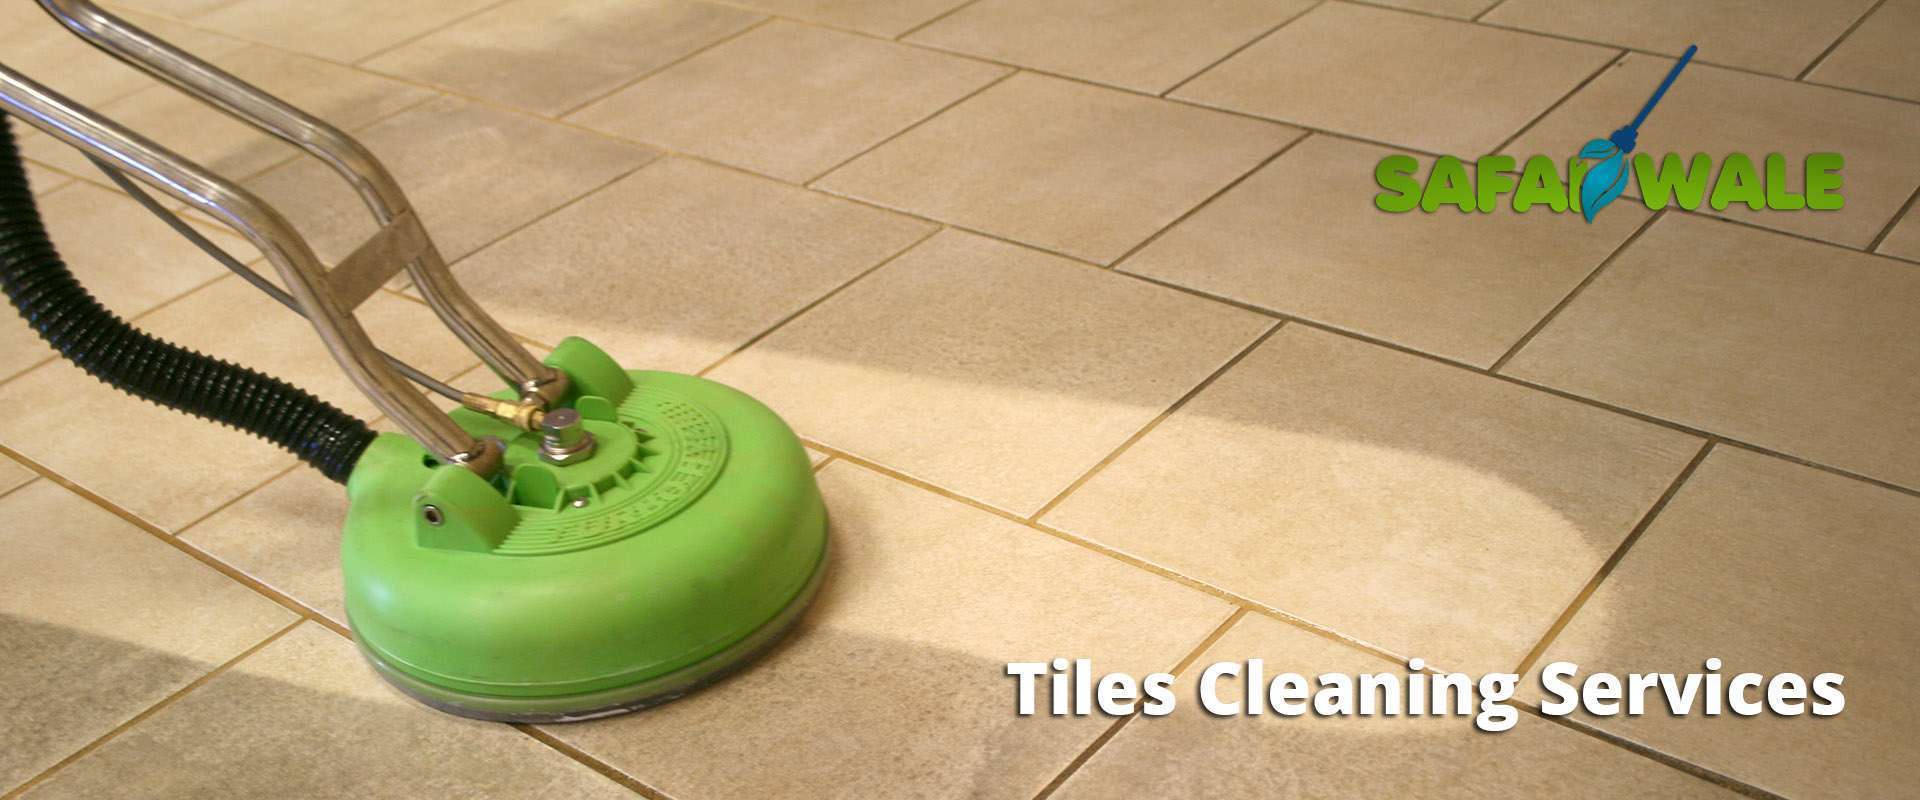 Tiles Cleaning Services